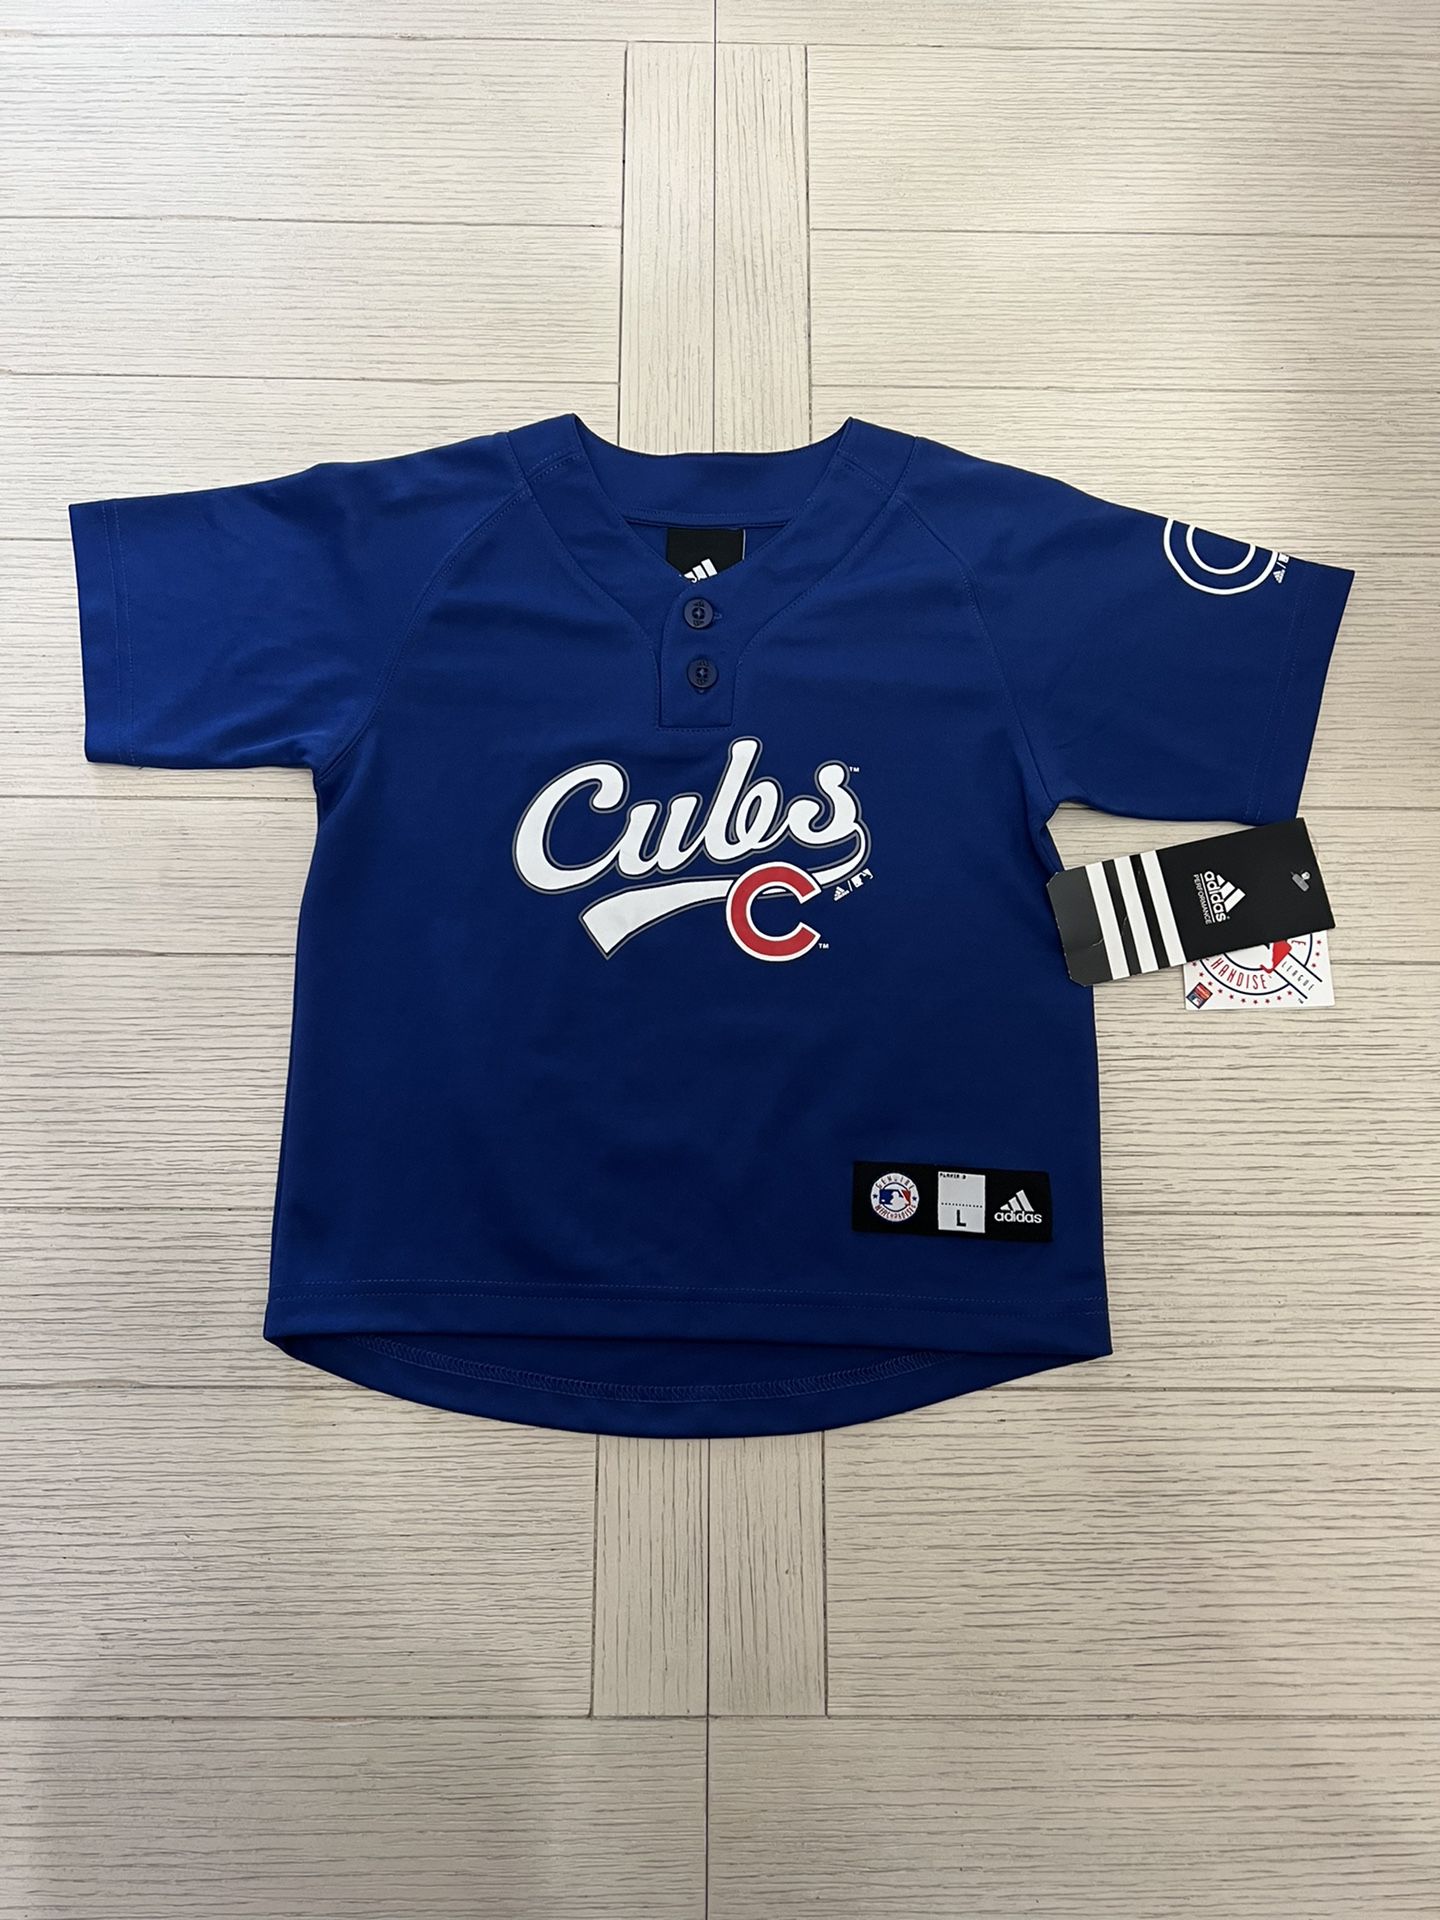 NWT BRAND NEW BOY'S GENUINE MLB ADIDAS CHICAGO CUBS JERSEY SHIRT SIZE LARGE (L) 7